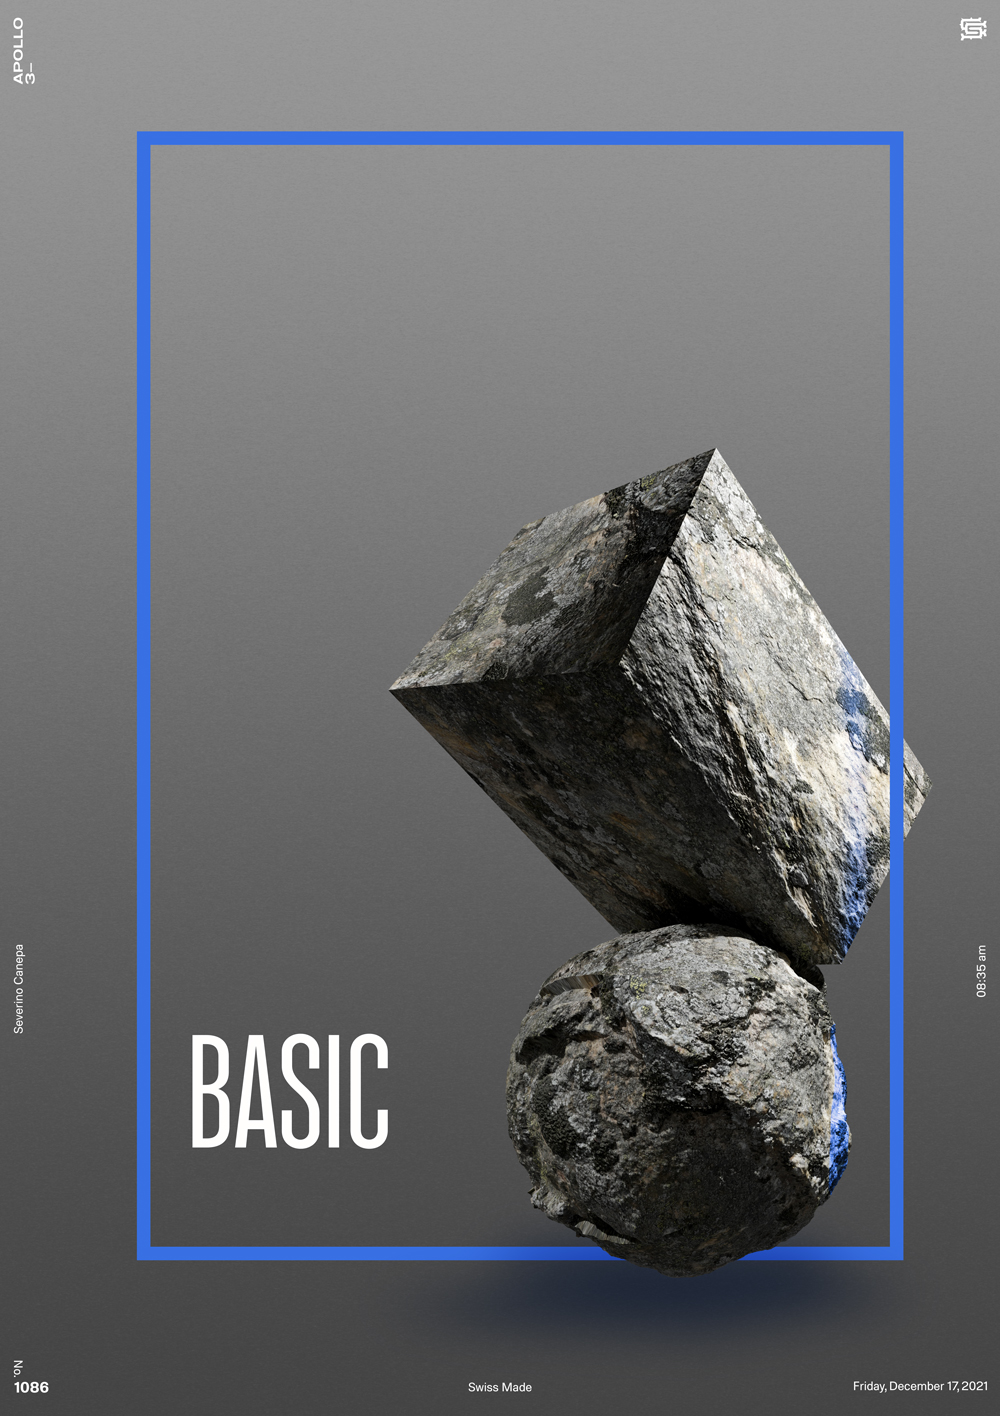 Minimalist digital creation with a minimalistic 3D composition of a rock